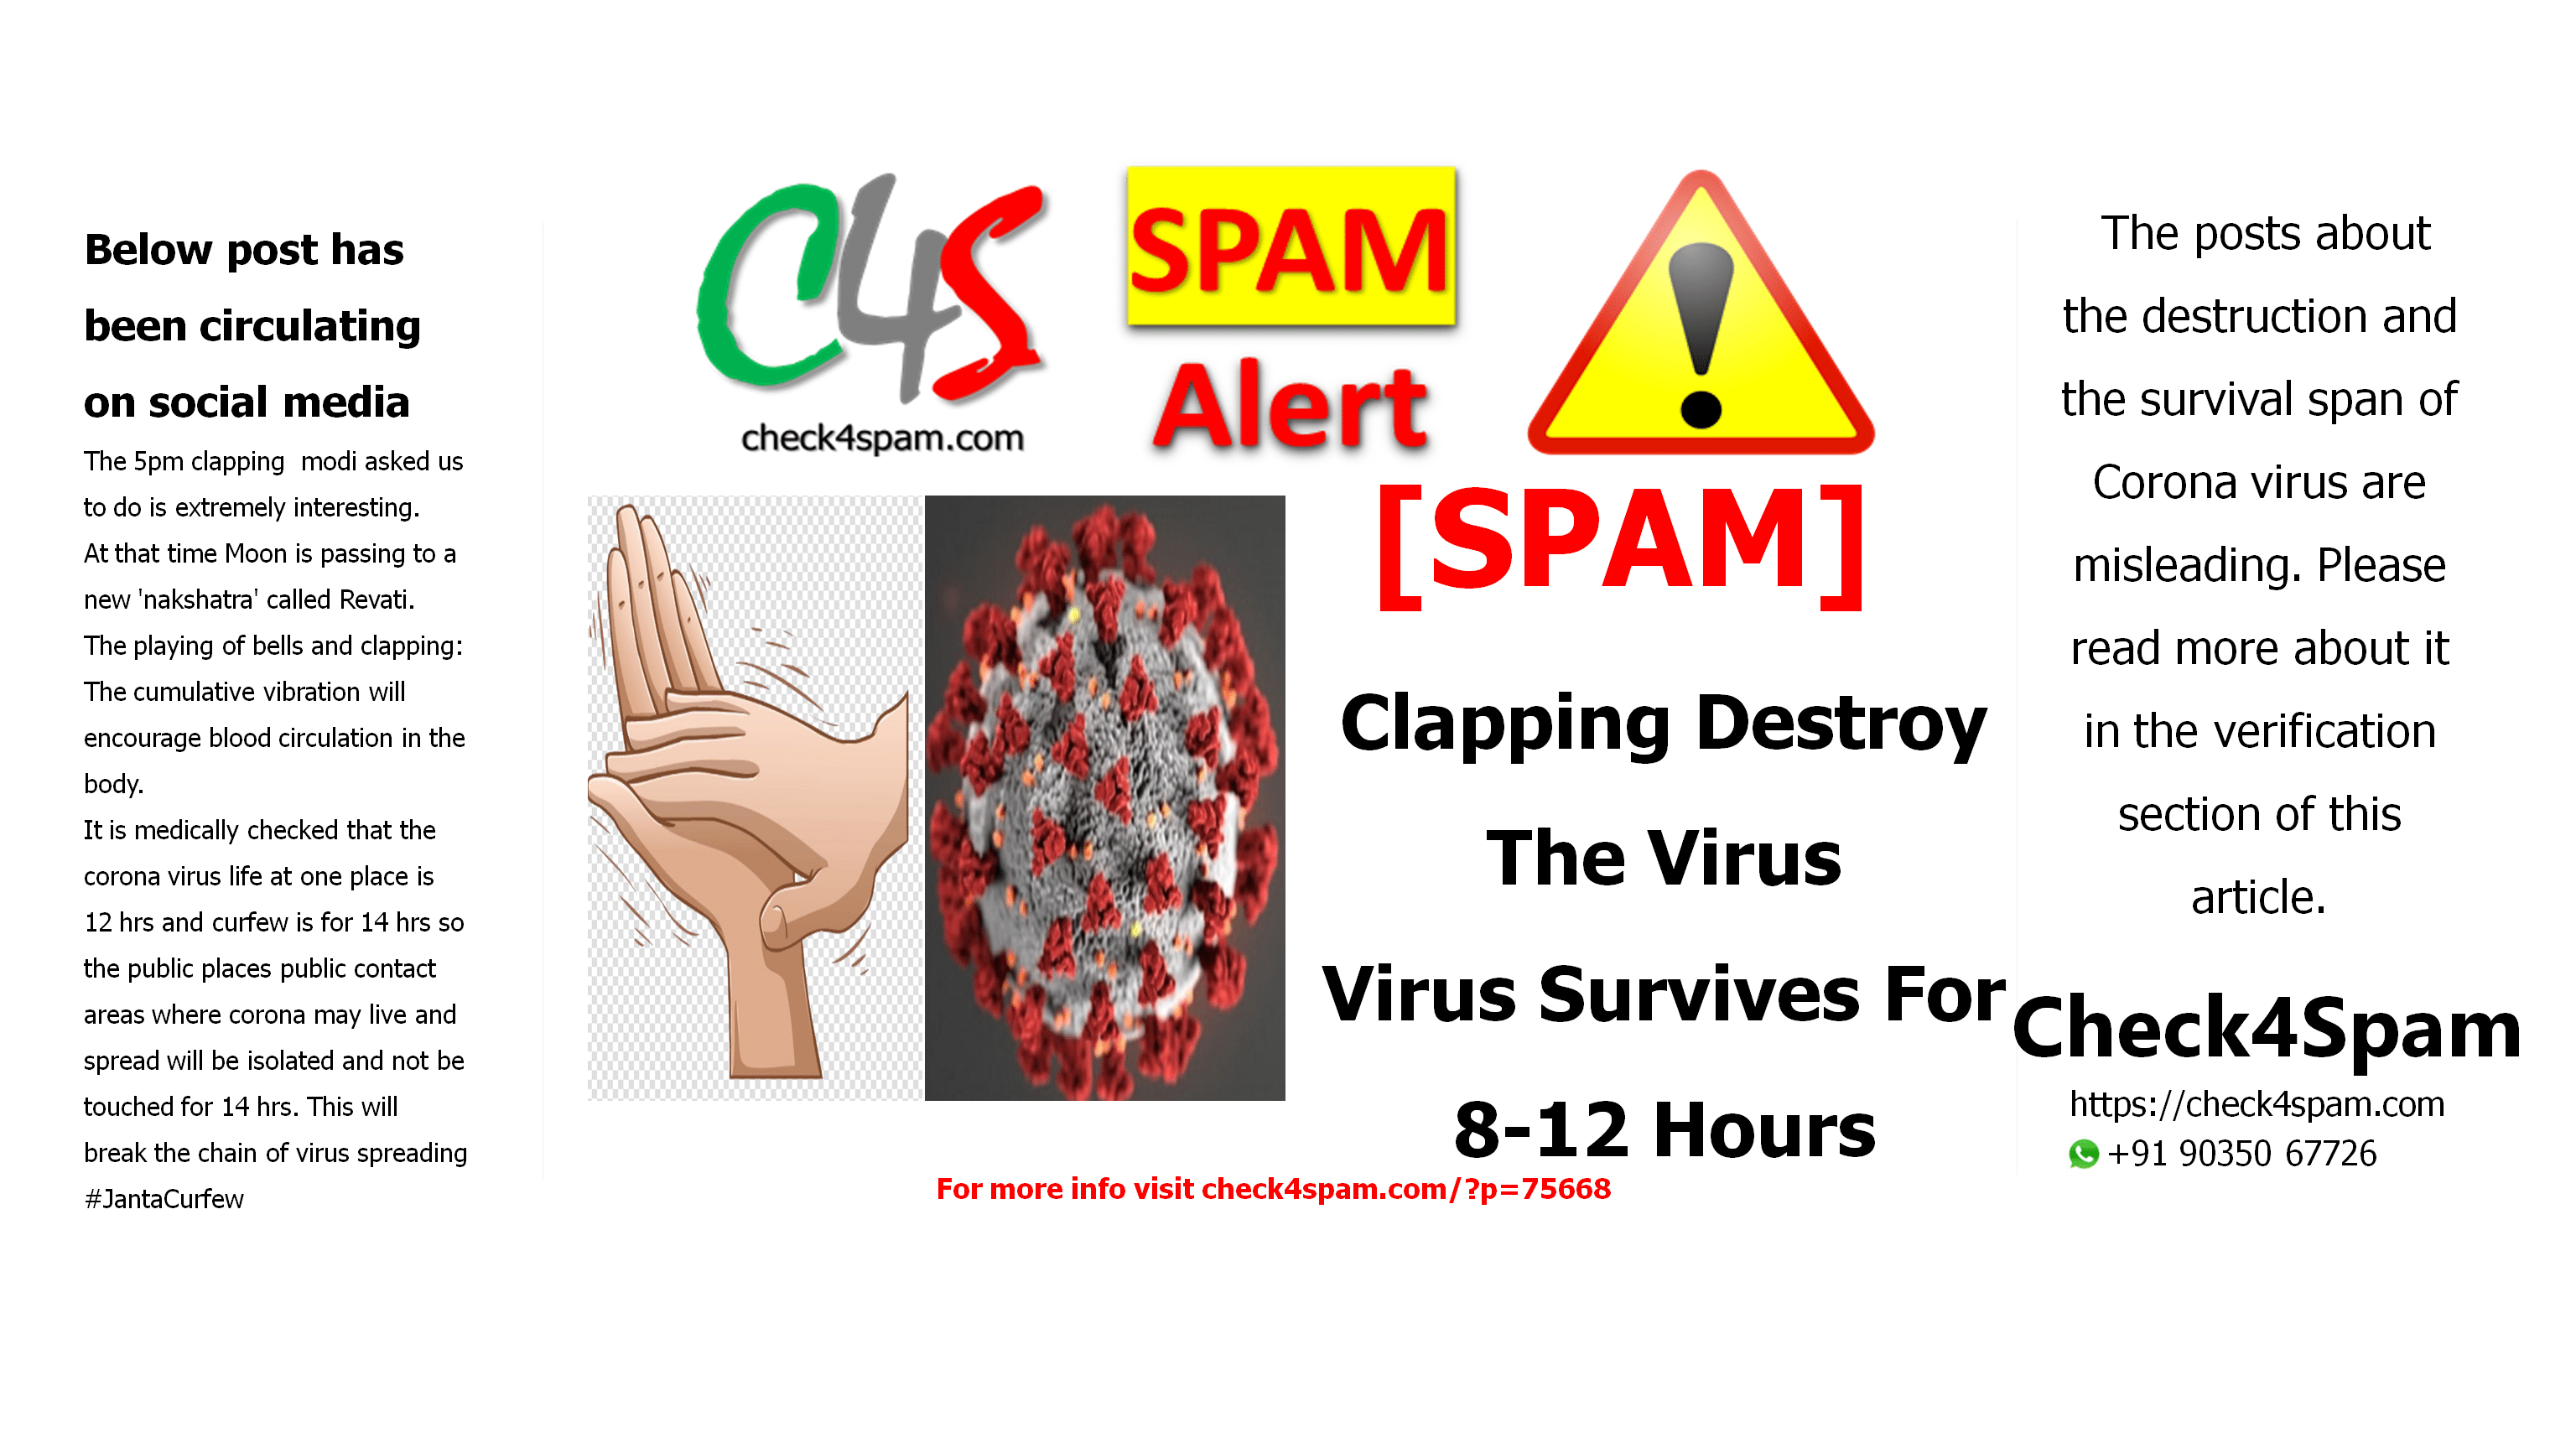 Clapping Destroy The Virus, Survival Span Of The Virus Is 8-12 Hours